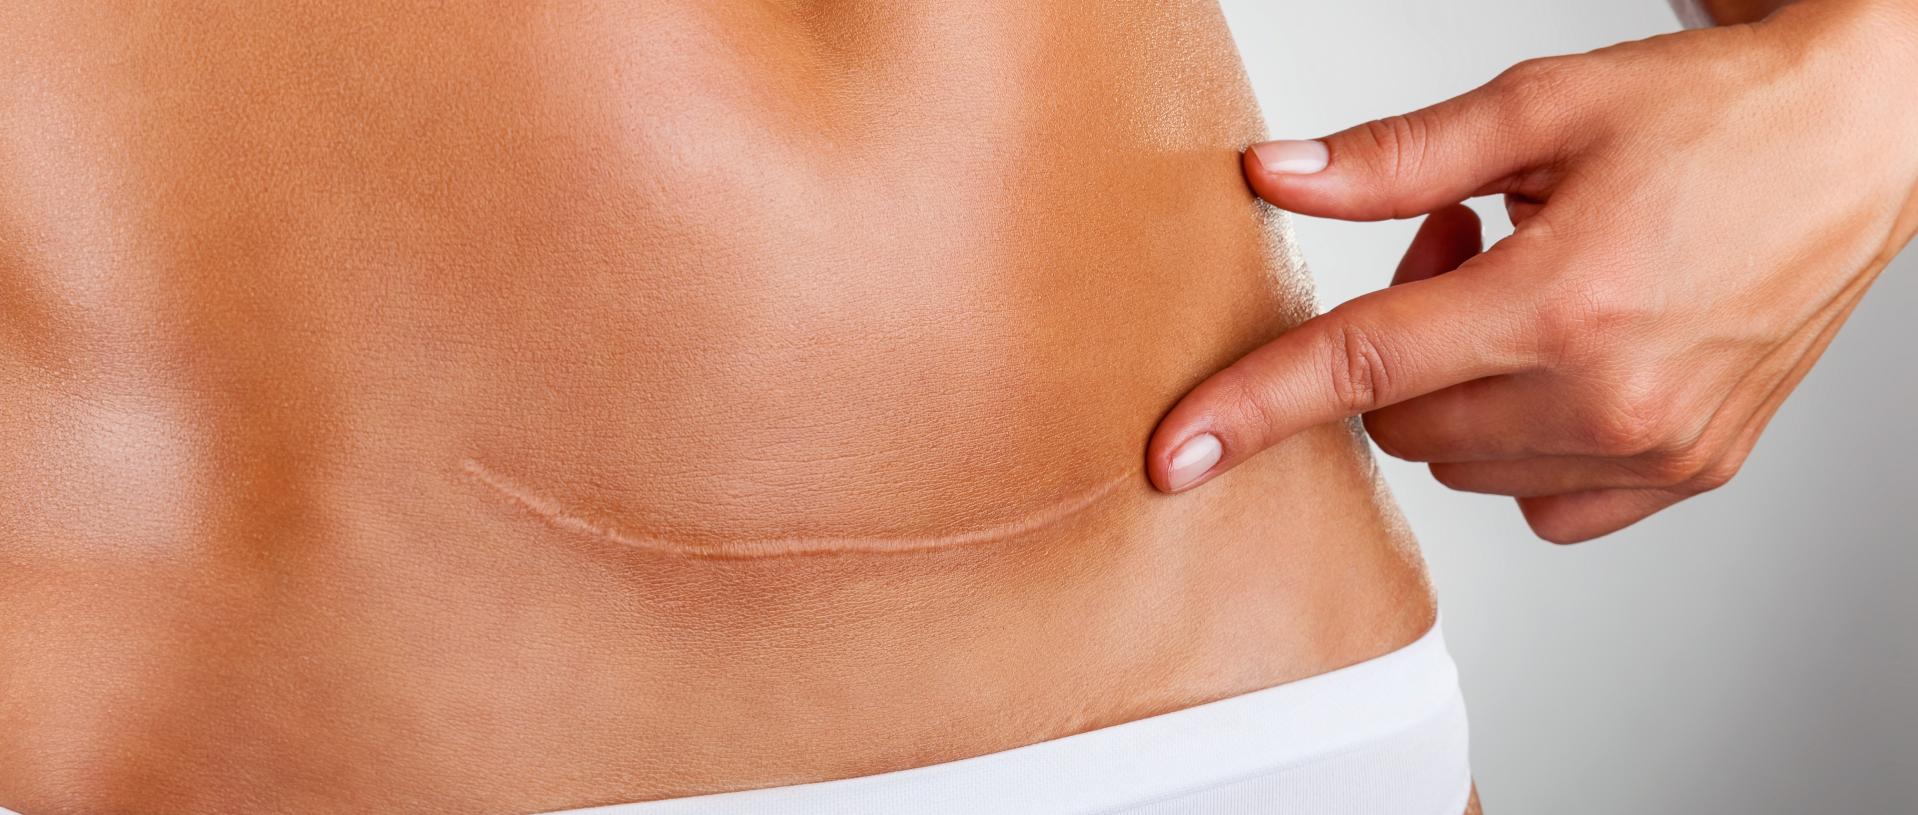 woman belly with a scar from a cesarean section | scar removal and revision